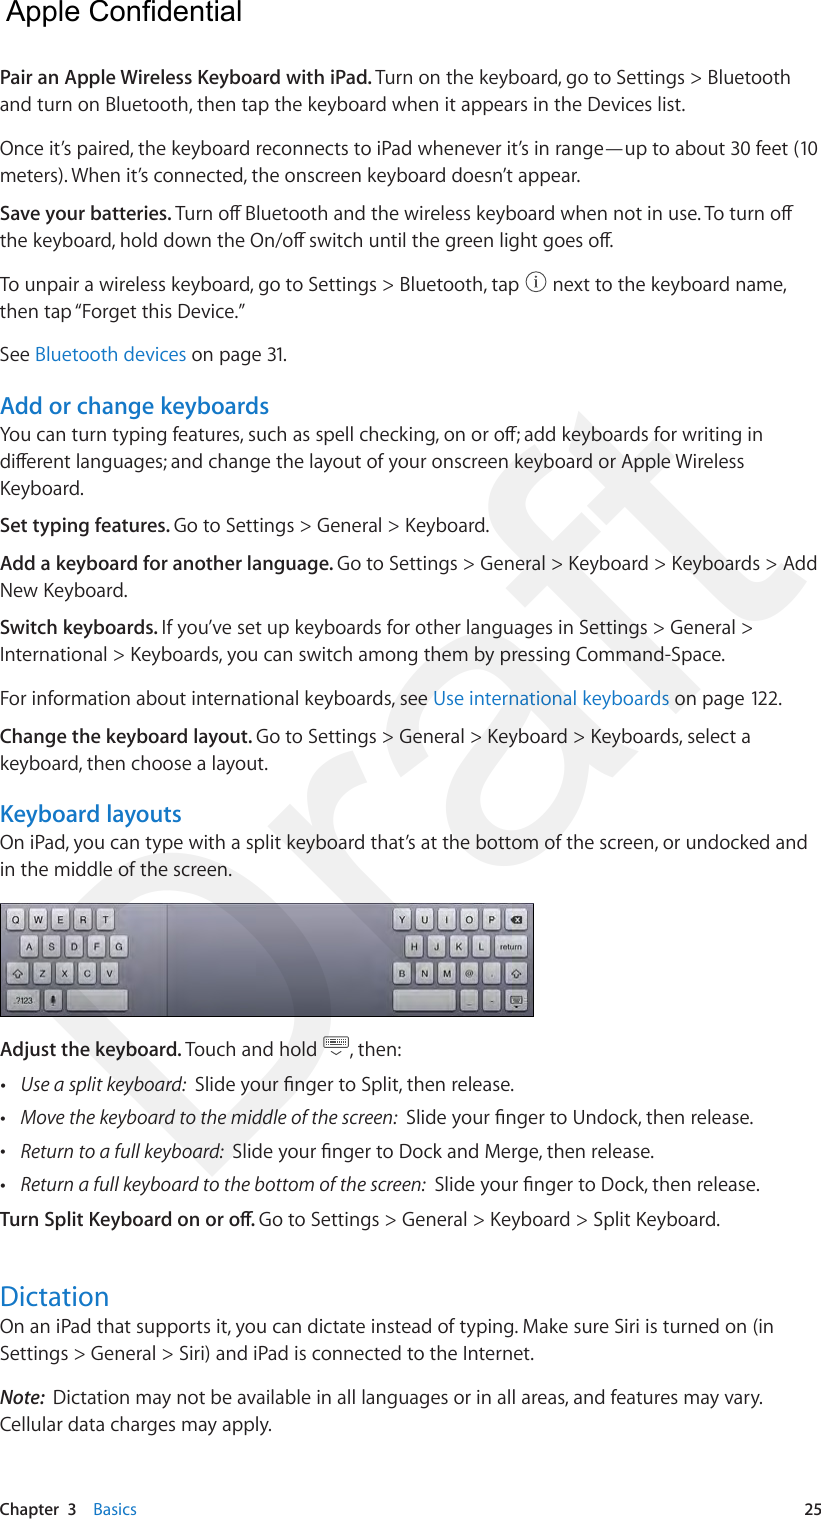 Chapter  3    Basics  25Pair an Apple Wireless Keyboard with iPad. Turn on the keyboard, go to Settings &gt; Bluetooth and turn on Bluetooth, then tap the keyboard when it appears in the Devices list.Once it’s paired, the keyboard reconnects to iPad whenever it’s in range—up to about 30 feet (10 meters). When it’s connected, the onscreen keyboard doesn’t appear.Save your batteries. To unpair a wireless keyboard, go to Settings &gt; Bluetooth, tap   next to the keyboard name, then tap “Forget this Device.”See Bluetooth devices on page 31.Add or change keyboardsKeyboard. Set typing features. Go to Settings &gt; General &gt; Keyboard. Add a keyboard for another language. Go to Settings &gt; General &gt; Keyboard &gt; Keyboards &gt; Add New Keyboard.Switch keyboards. If you’ve set up keyboards for other languages in Settings &gt; General &gt; International &gt; Keyboards, you can switch among them by pressing Command-Space.For information about international keyboards, see Use international keyboards on page 122.Change the keyboard layout. Go to Settings &gt; General &gt; Keyboard &gt; Keyboards, select a keyboard, then choose a layout. Keyboard layoutsOn iPad, you can type with a split keyboard that’s at the bottom of the screen, or undocked and in the middle of the screen. Adjust the keyboard. Touch and hold  , then: •Use a split keyboard:  •Move the keyboard to the middle of the screen:  •Return to a full keyboard:  •Return a full keyboard to the bottom of the screen: Go to Settings &gt; General &gt; Keyboard &gt; Split Keyboard.DictationOn an iPad that supports it, you can dictate instead of typing. Make sure Siri is turned on (in Settings &gt; General &gt; Siri) and iPad is connected to the Internet.Note:  Dictation may not be available in all languages or in all areas, and features may vary. Cellular data charges may apply.  Apple Confidential Draft